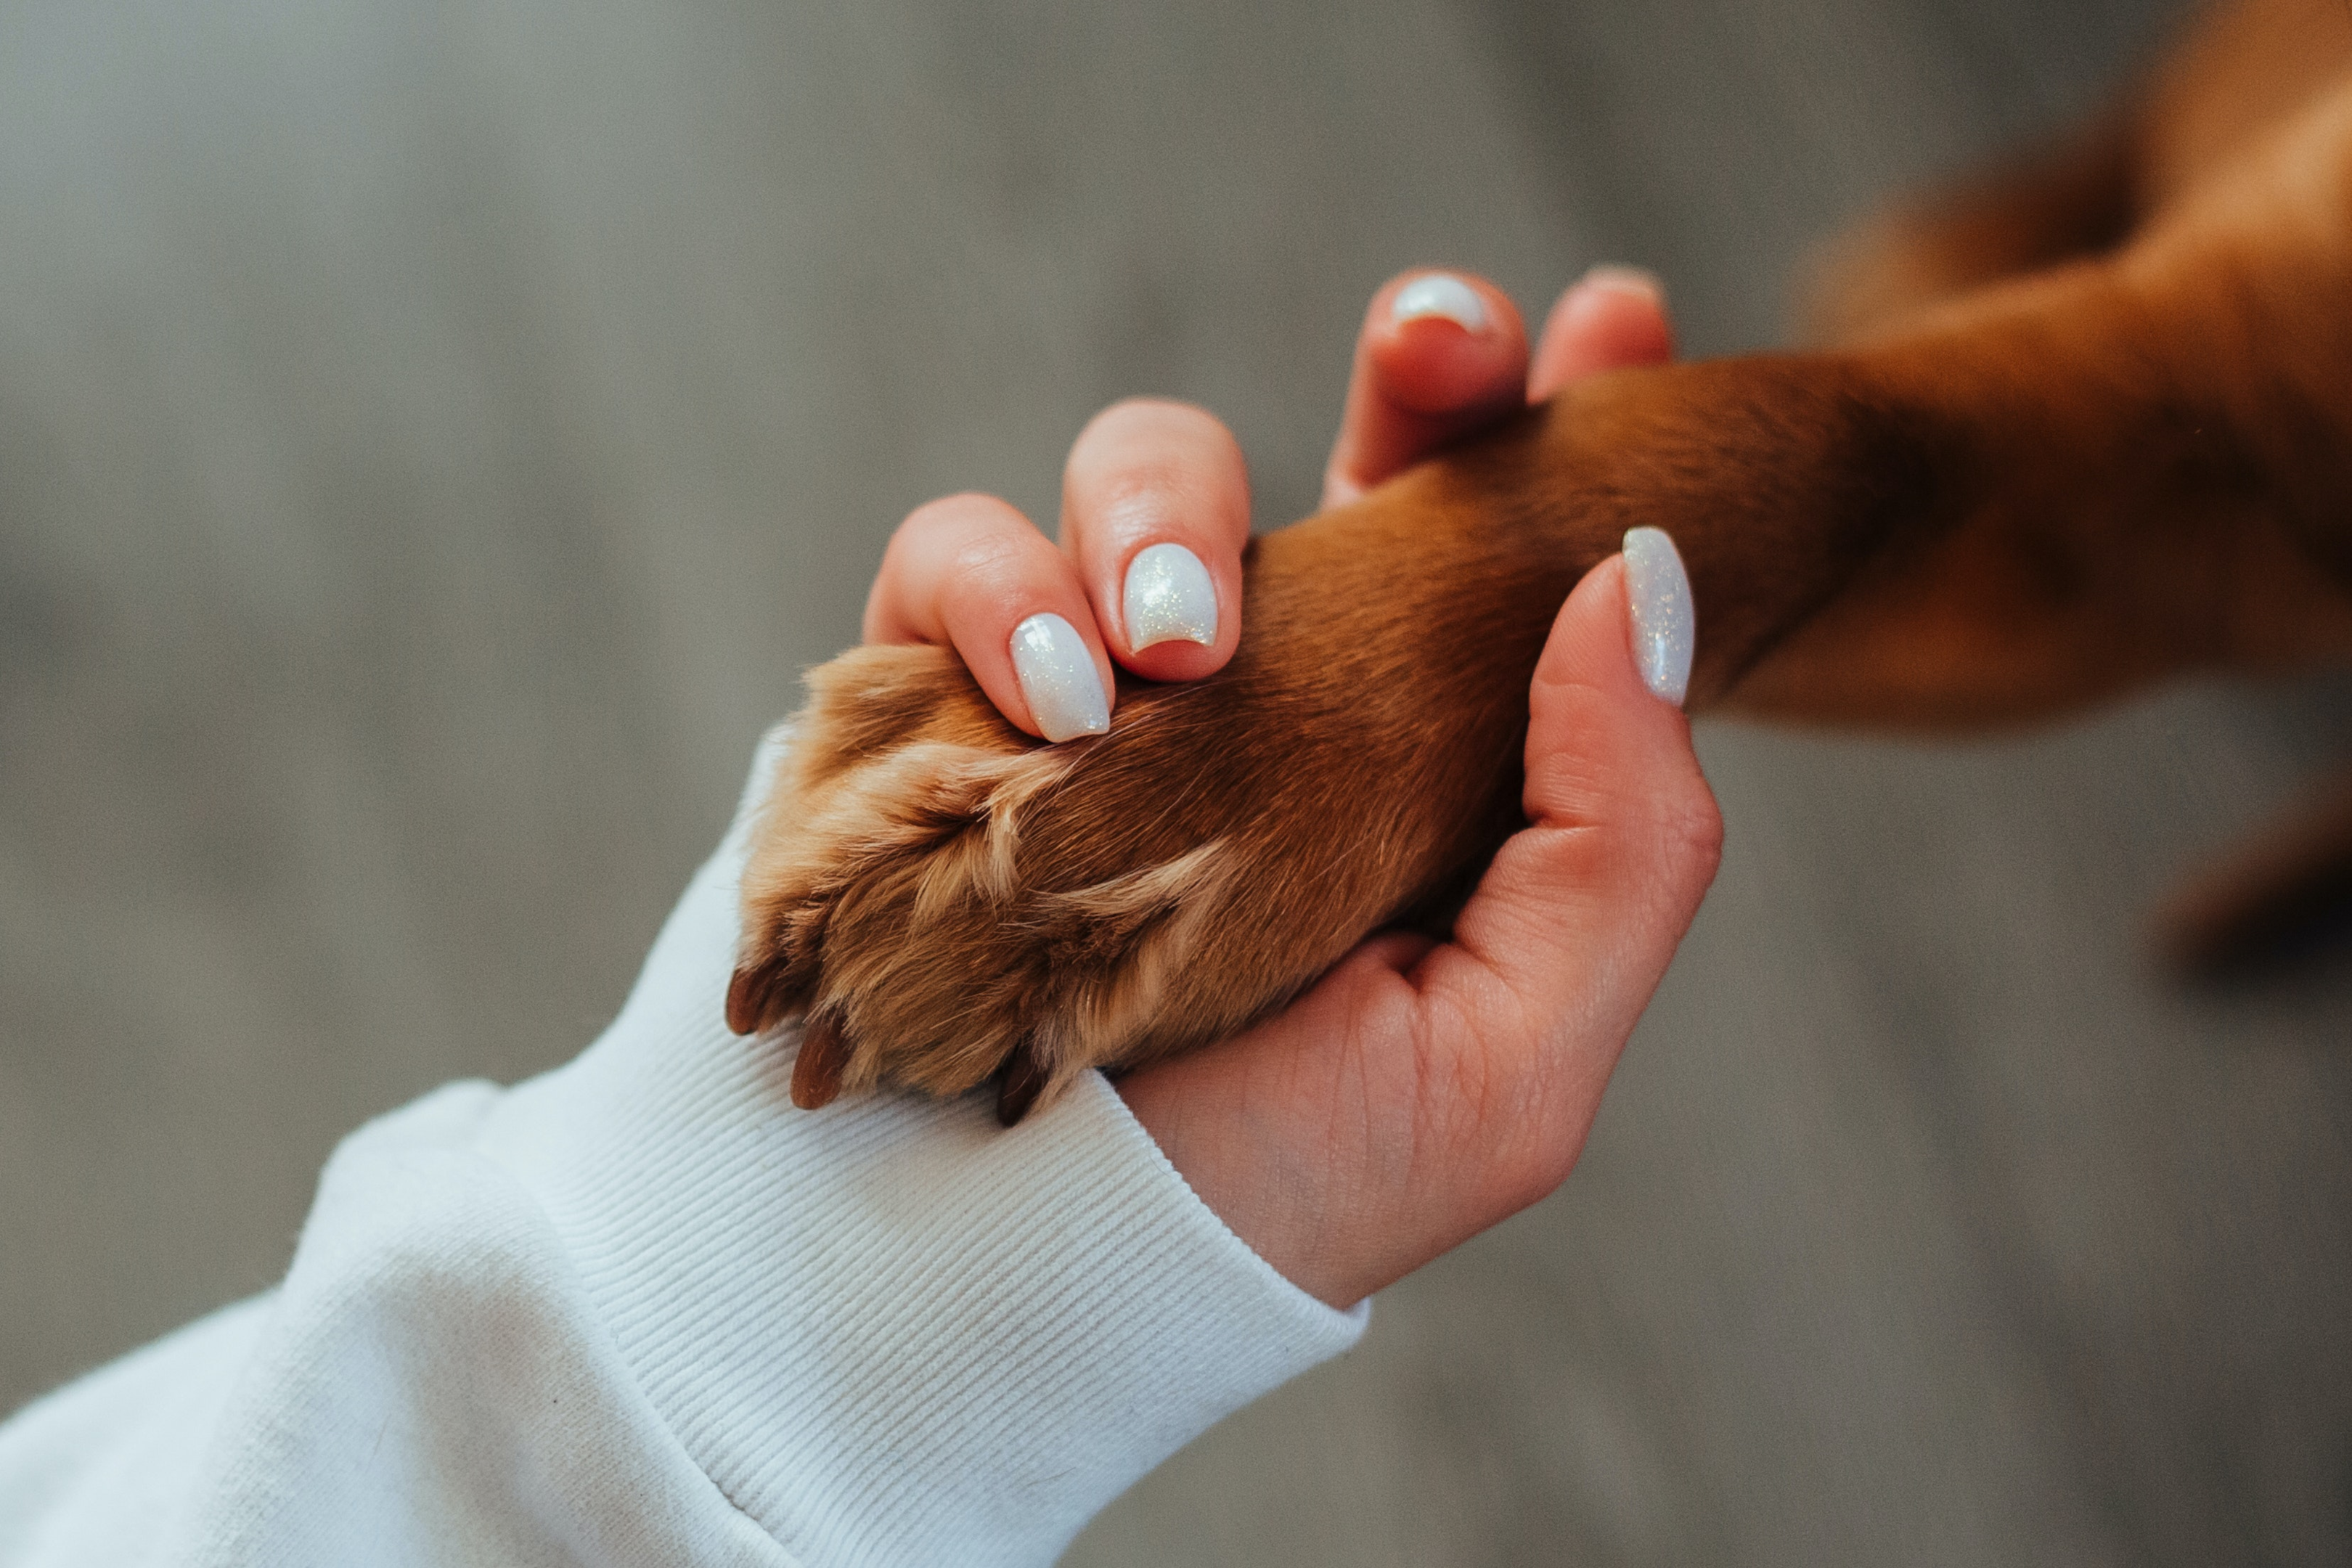 https://www.pexels.com/photo/unrecognizable-woman-holding-paw-of-dog-7788657/